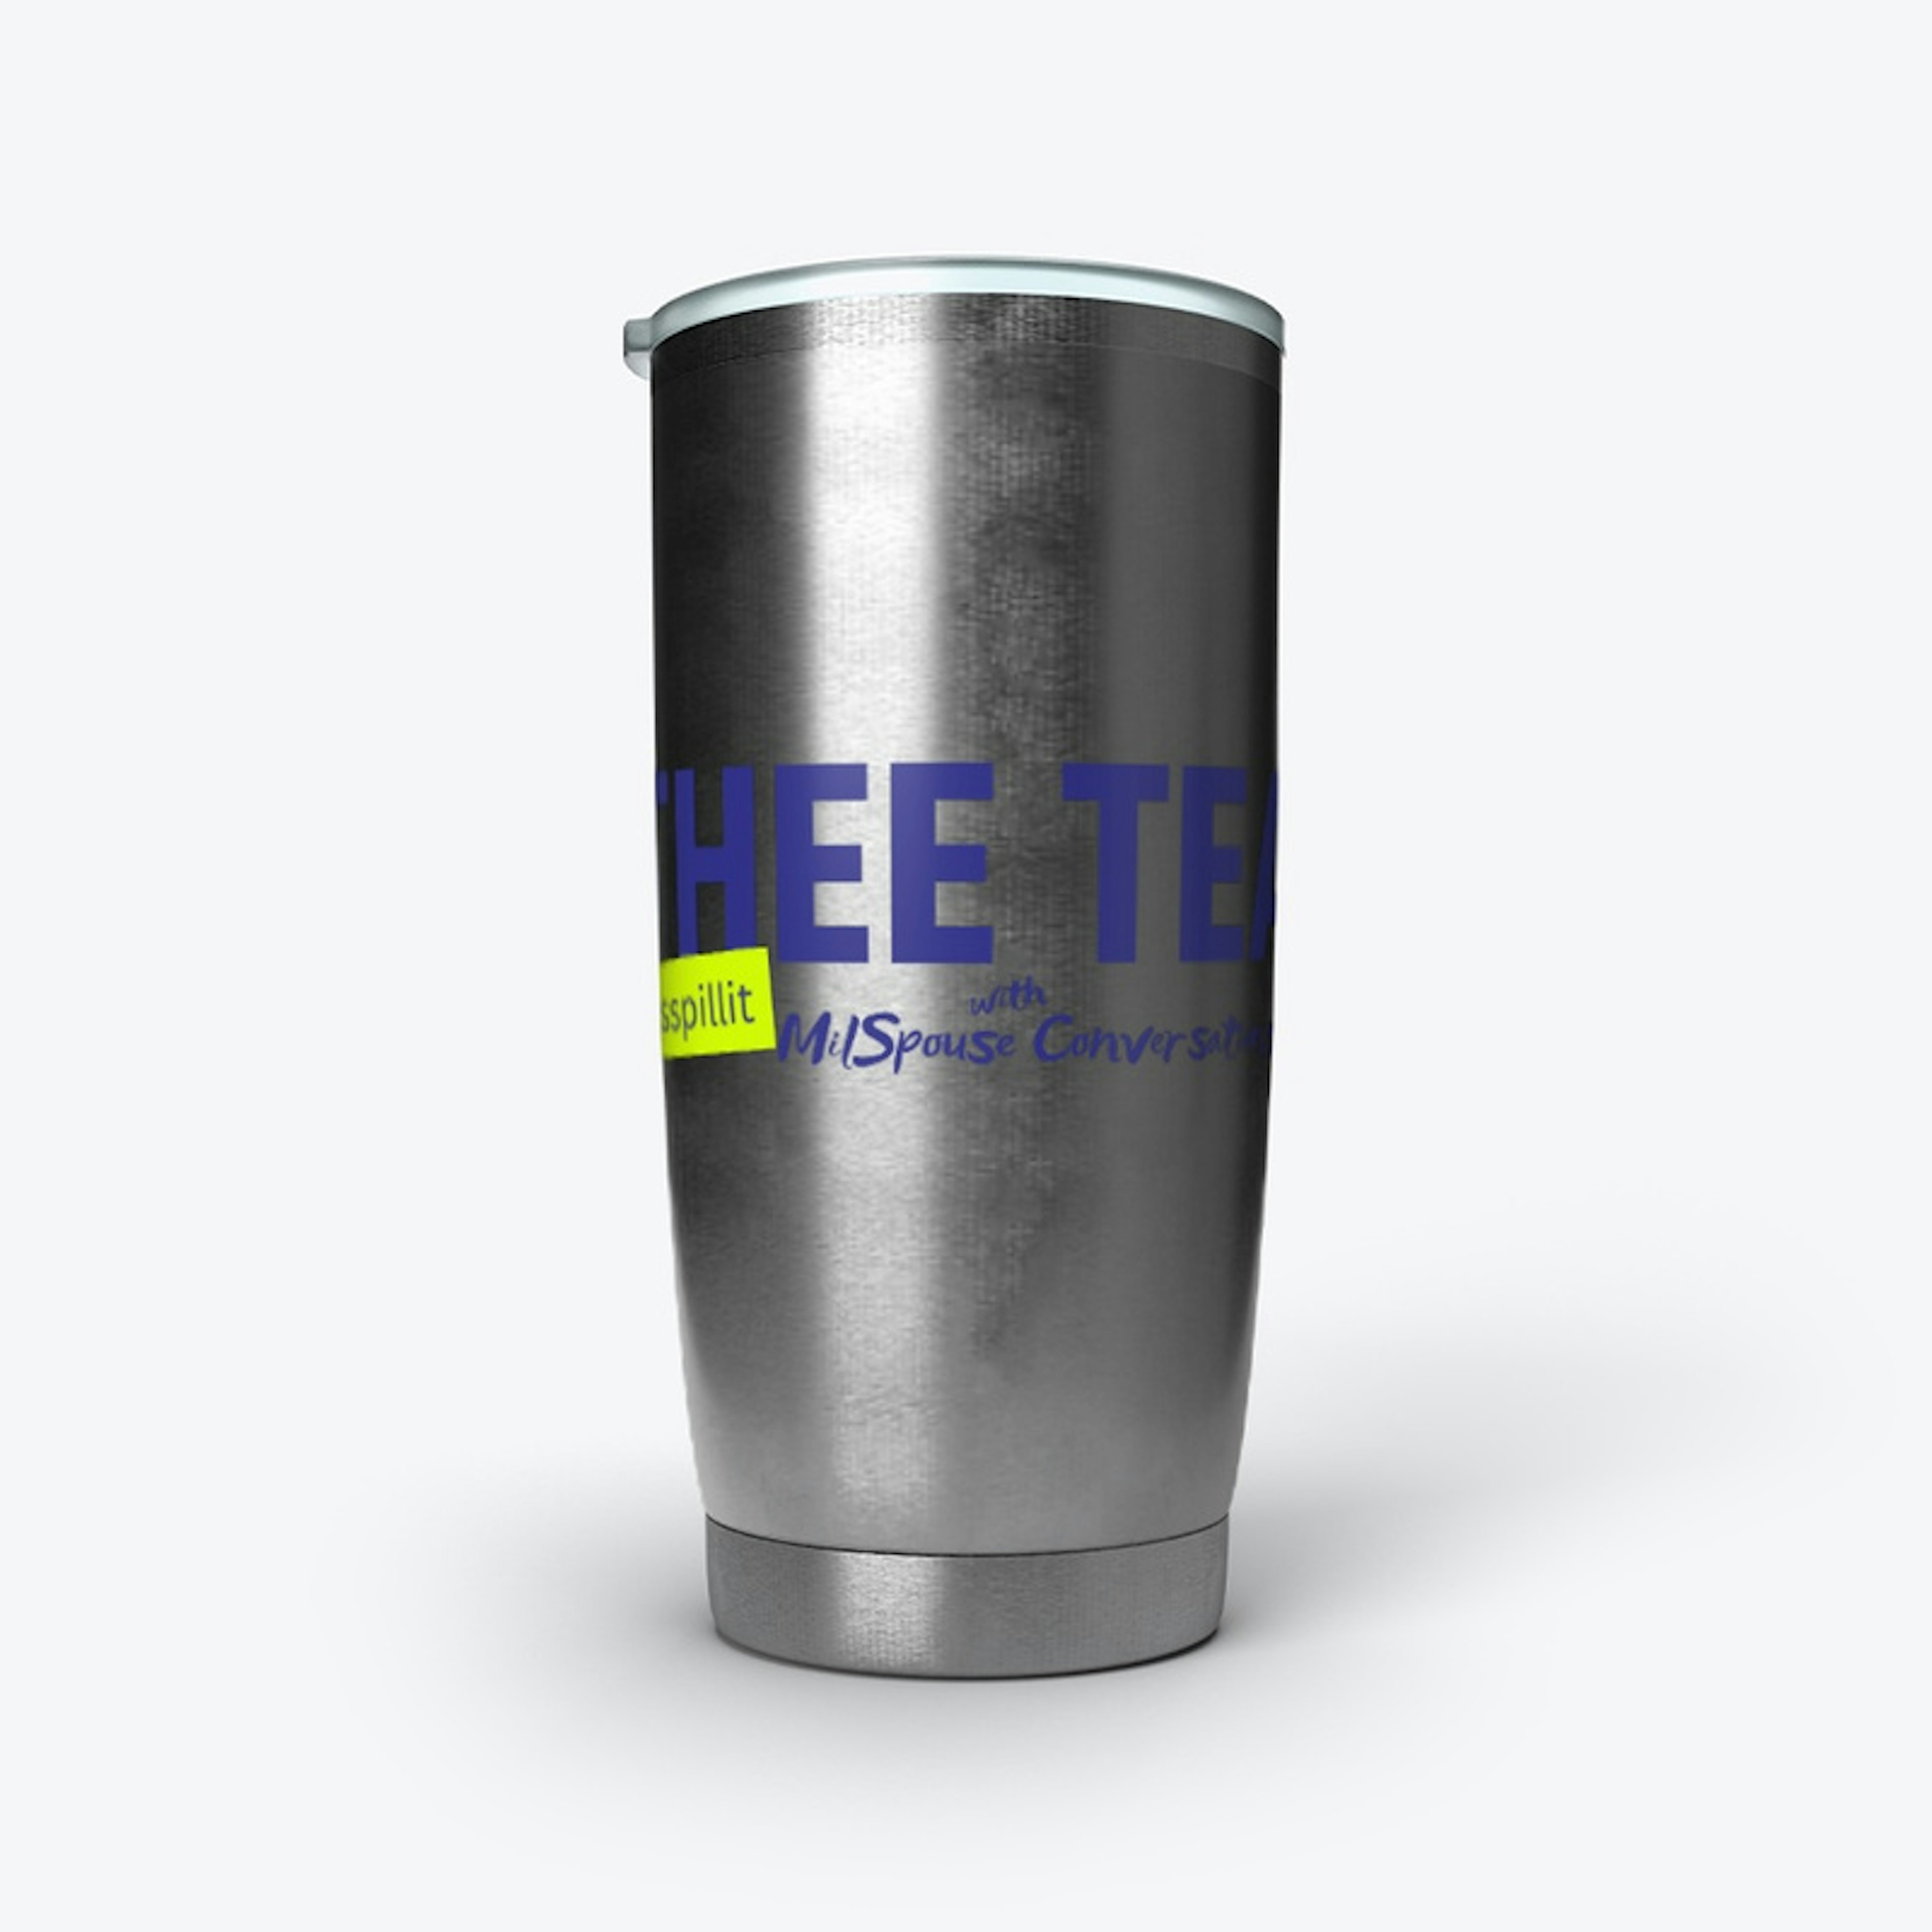 THEE Tea Podcast Show Merch 